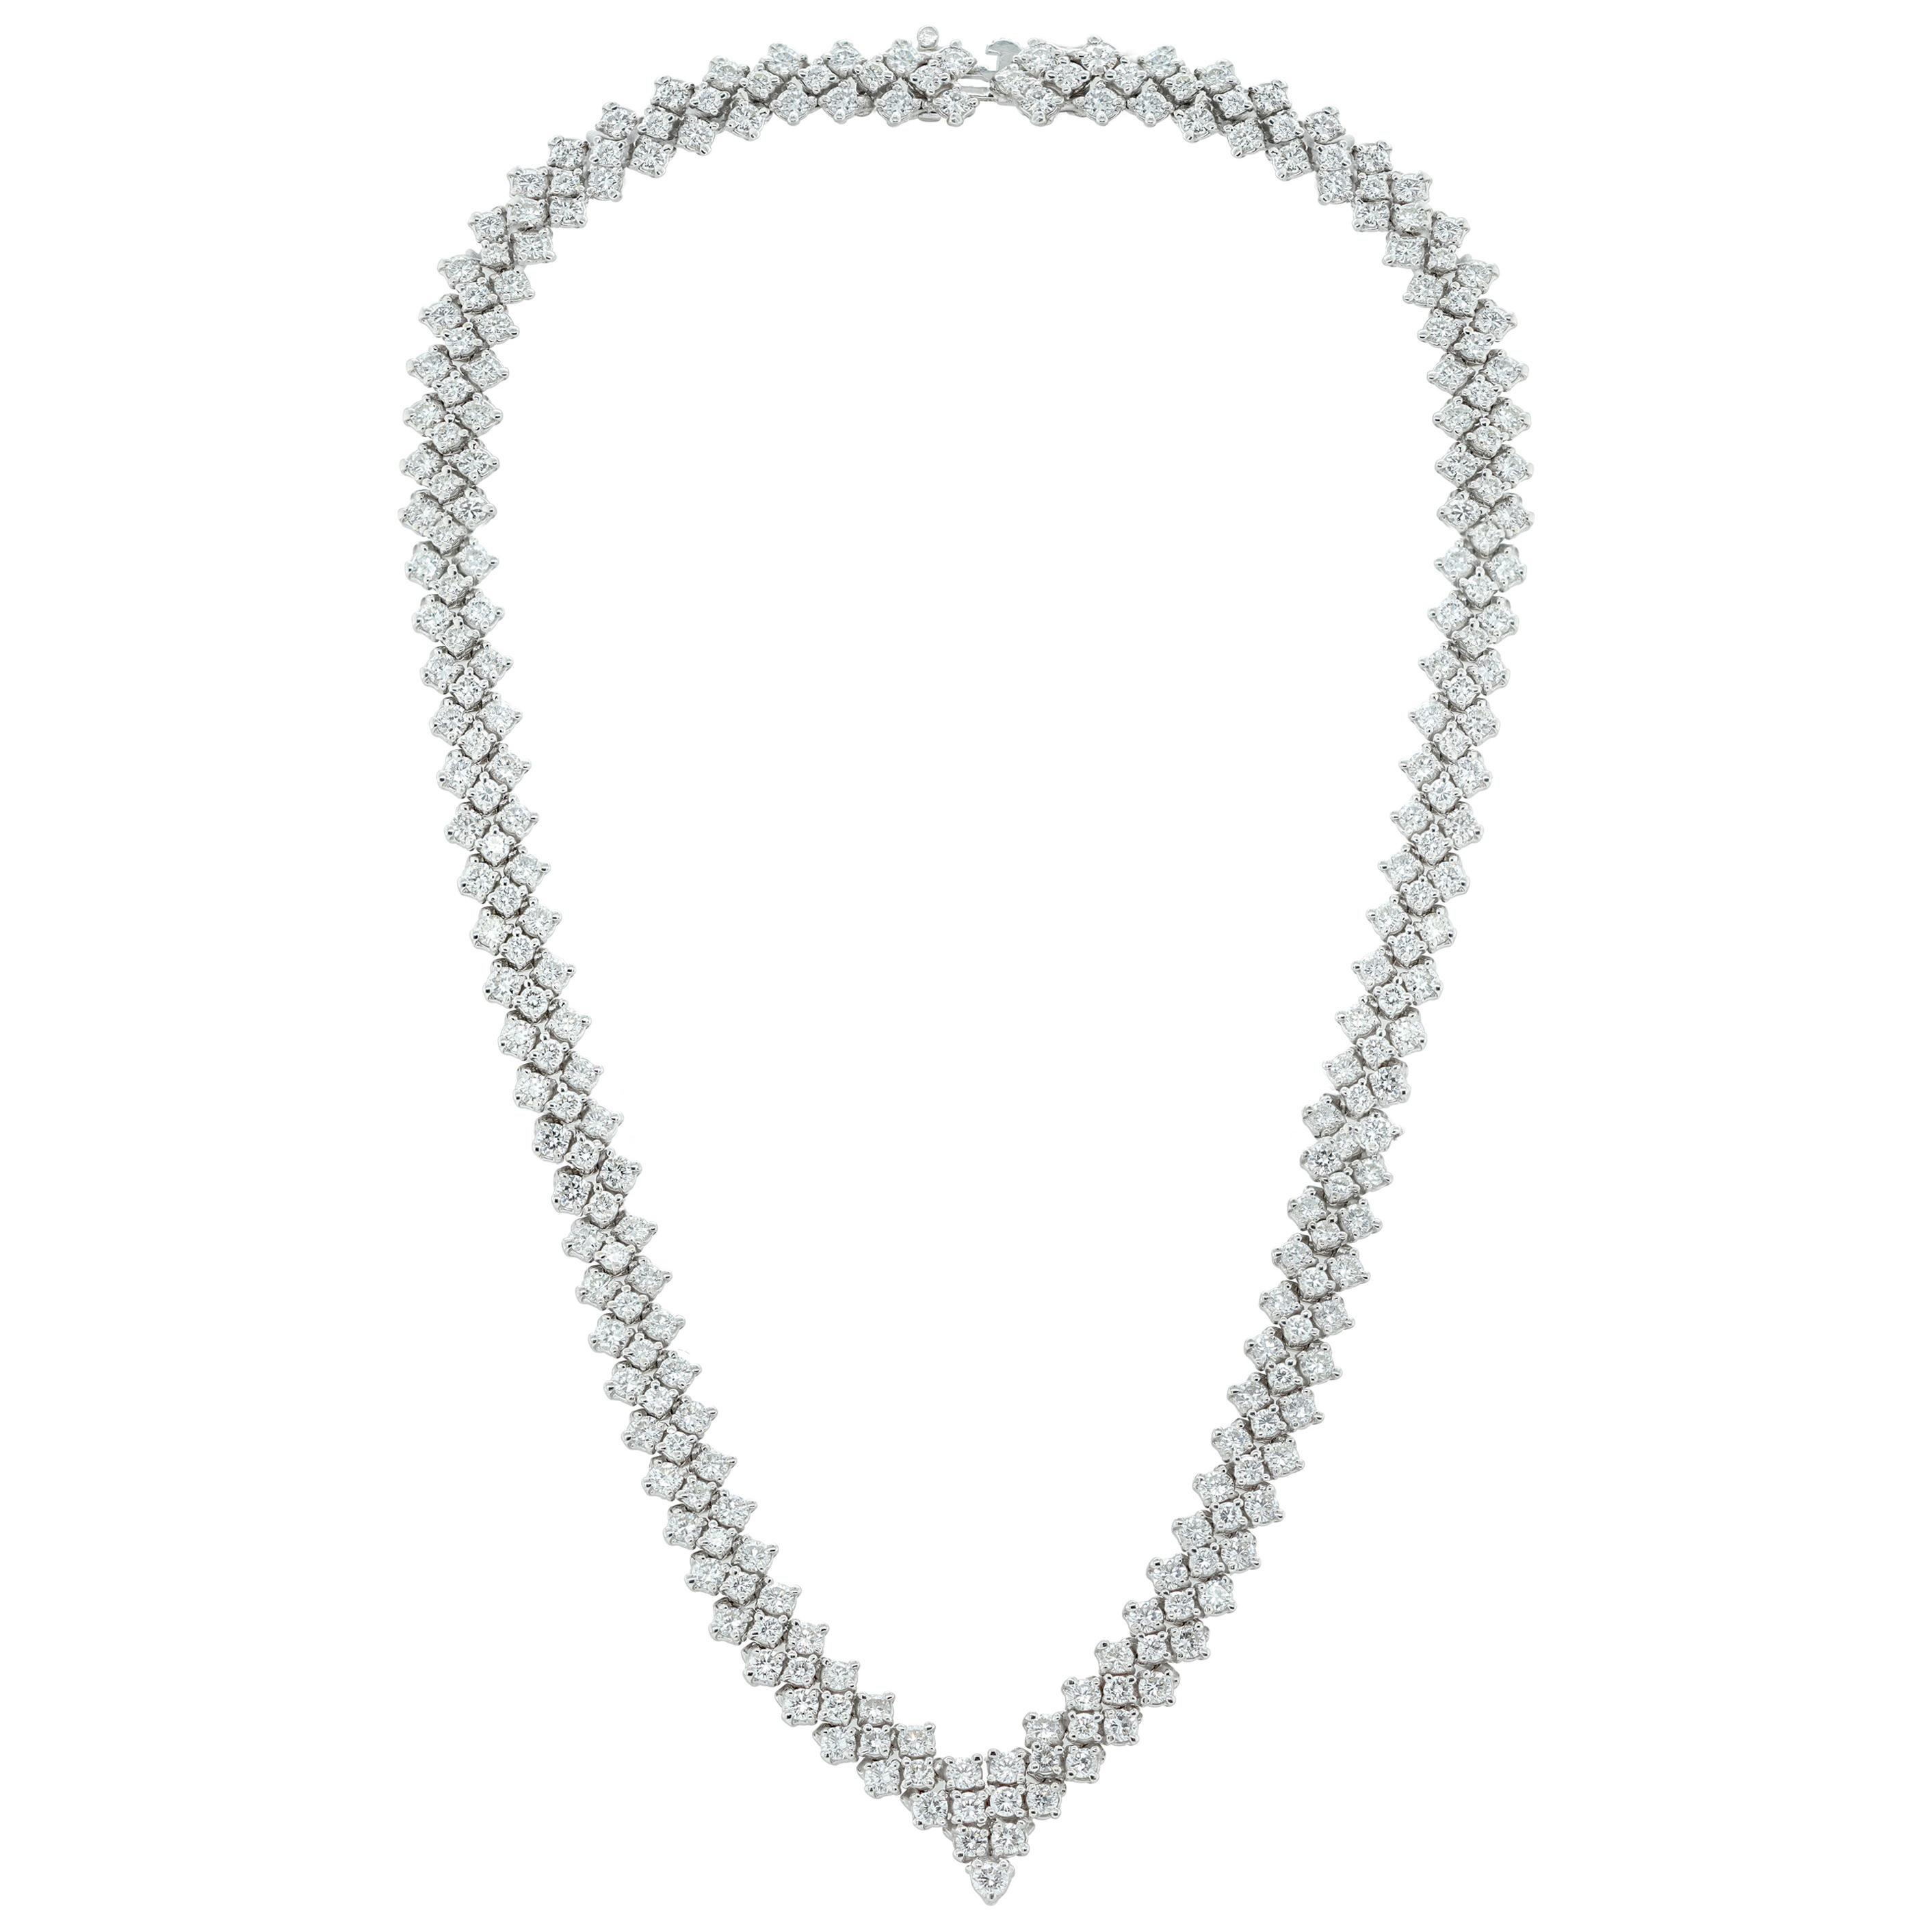 22.00 Cts of Round Diamonds Cluster Style Necklace Tapering off with a V-Style For Sale